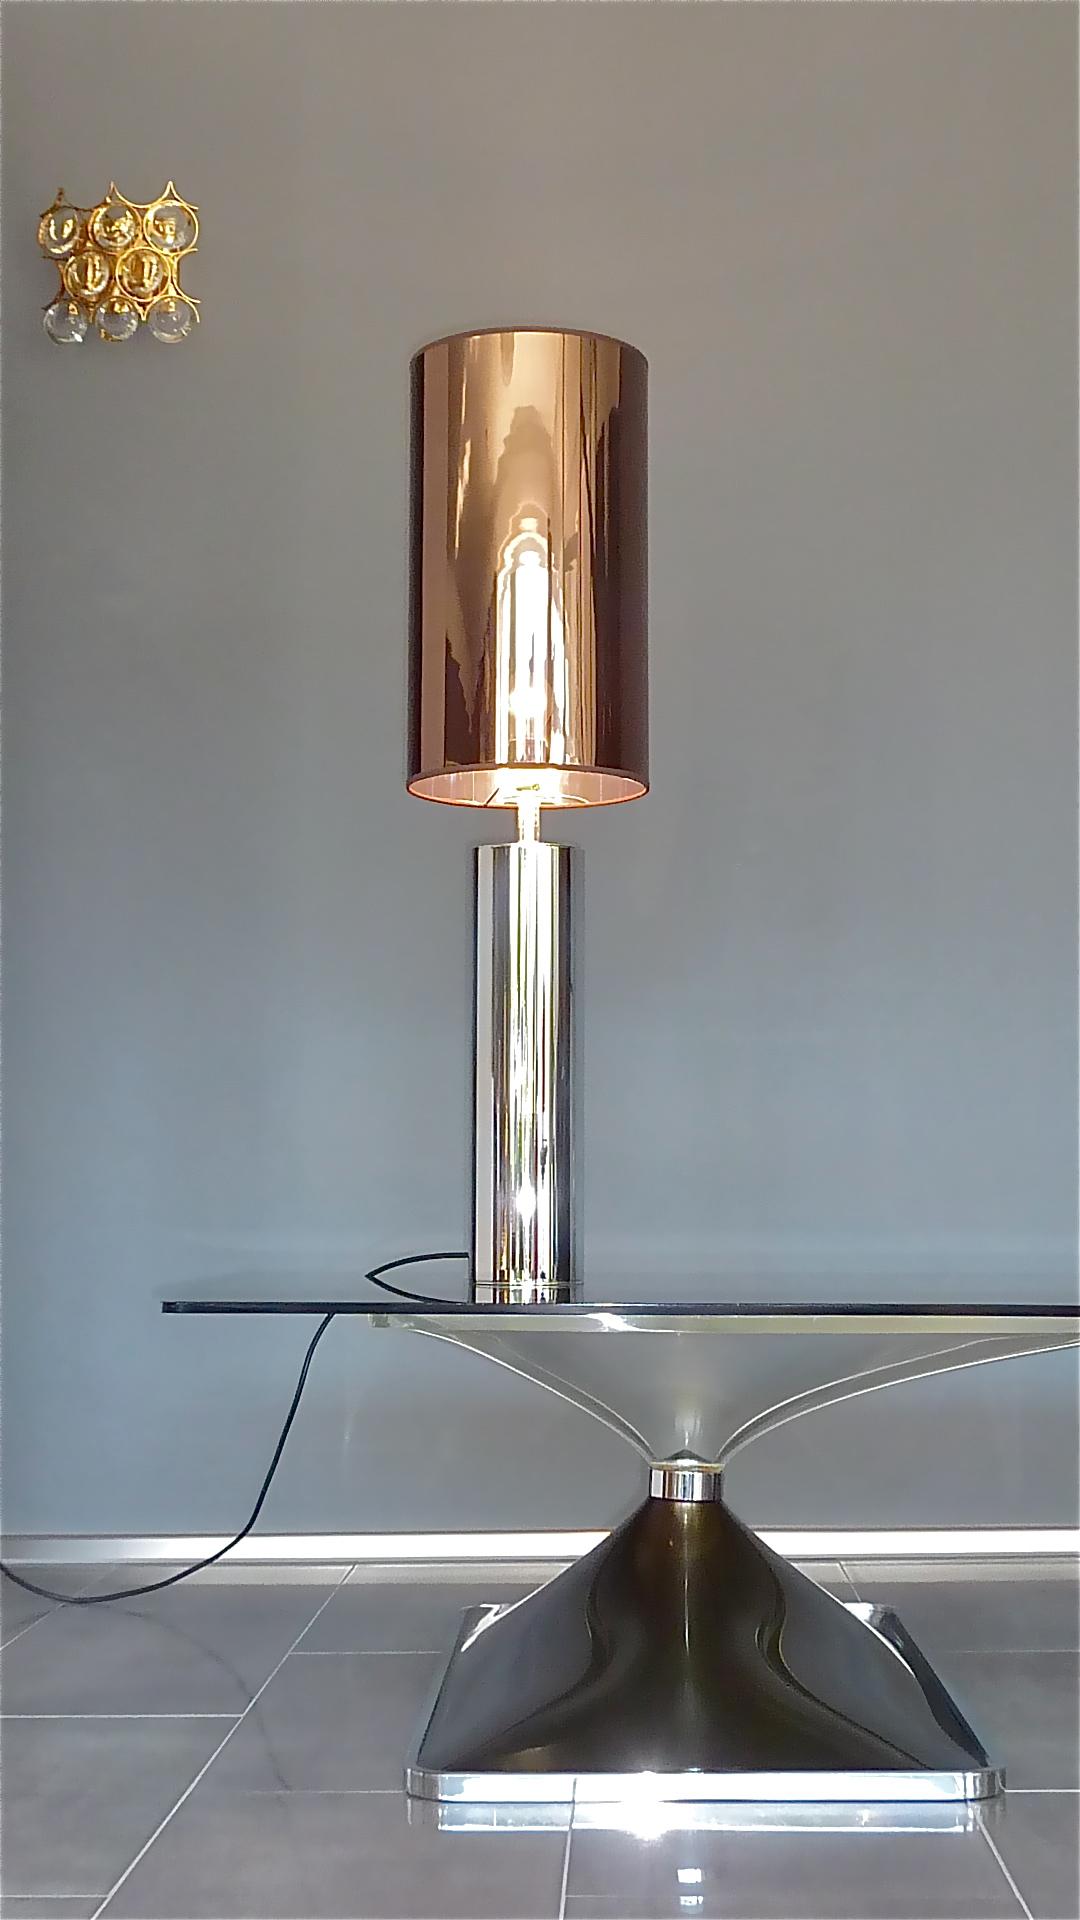 Polychromed Monumental Chrome Steel Table Lamp Willy Rizzo Cardin Style Bronze Mirror 1970s For Sale